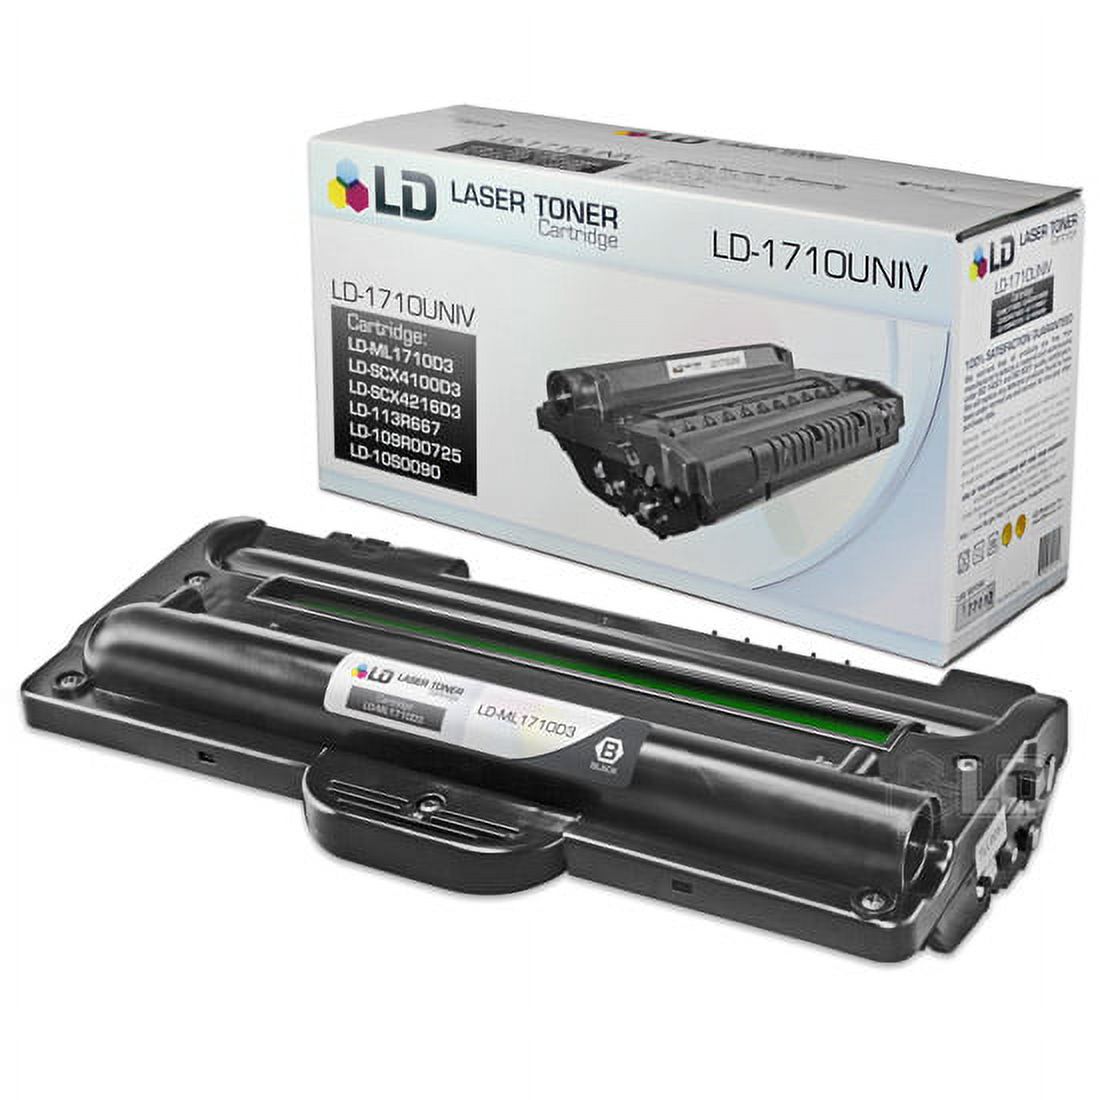 Compatible Laser Toner Cartridge for Samsung ML-1710D3 Black Laser Toner for ML-1500, ML-1510, ML-1510B, ML-1520, ML-1710, ML-1710B, ML-1710D, ML-1710P, ML-1740, ML-1750 & ML-1755 s - image 1 of 7